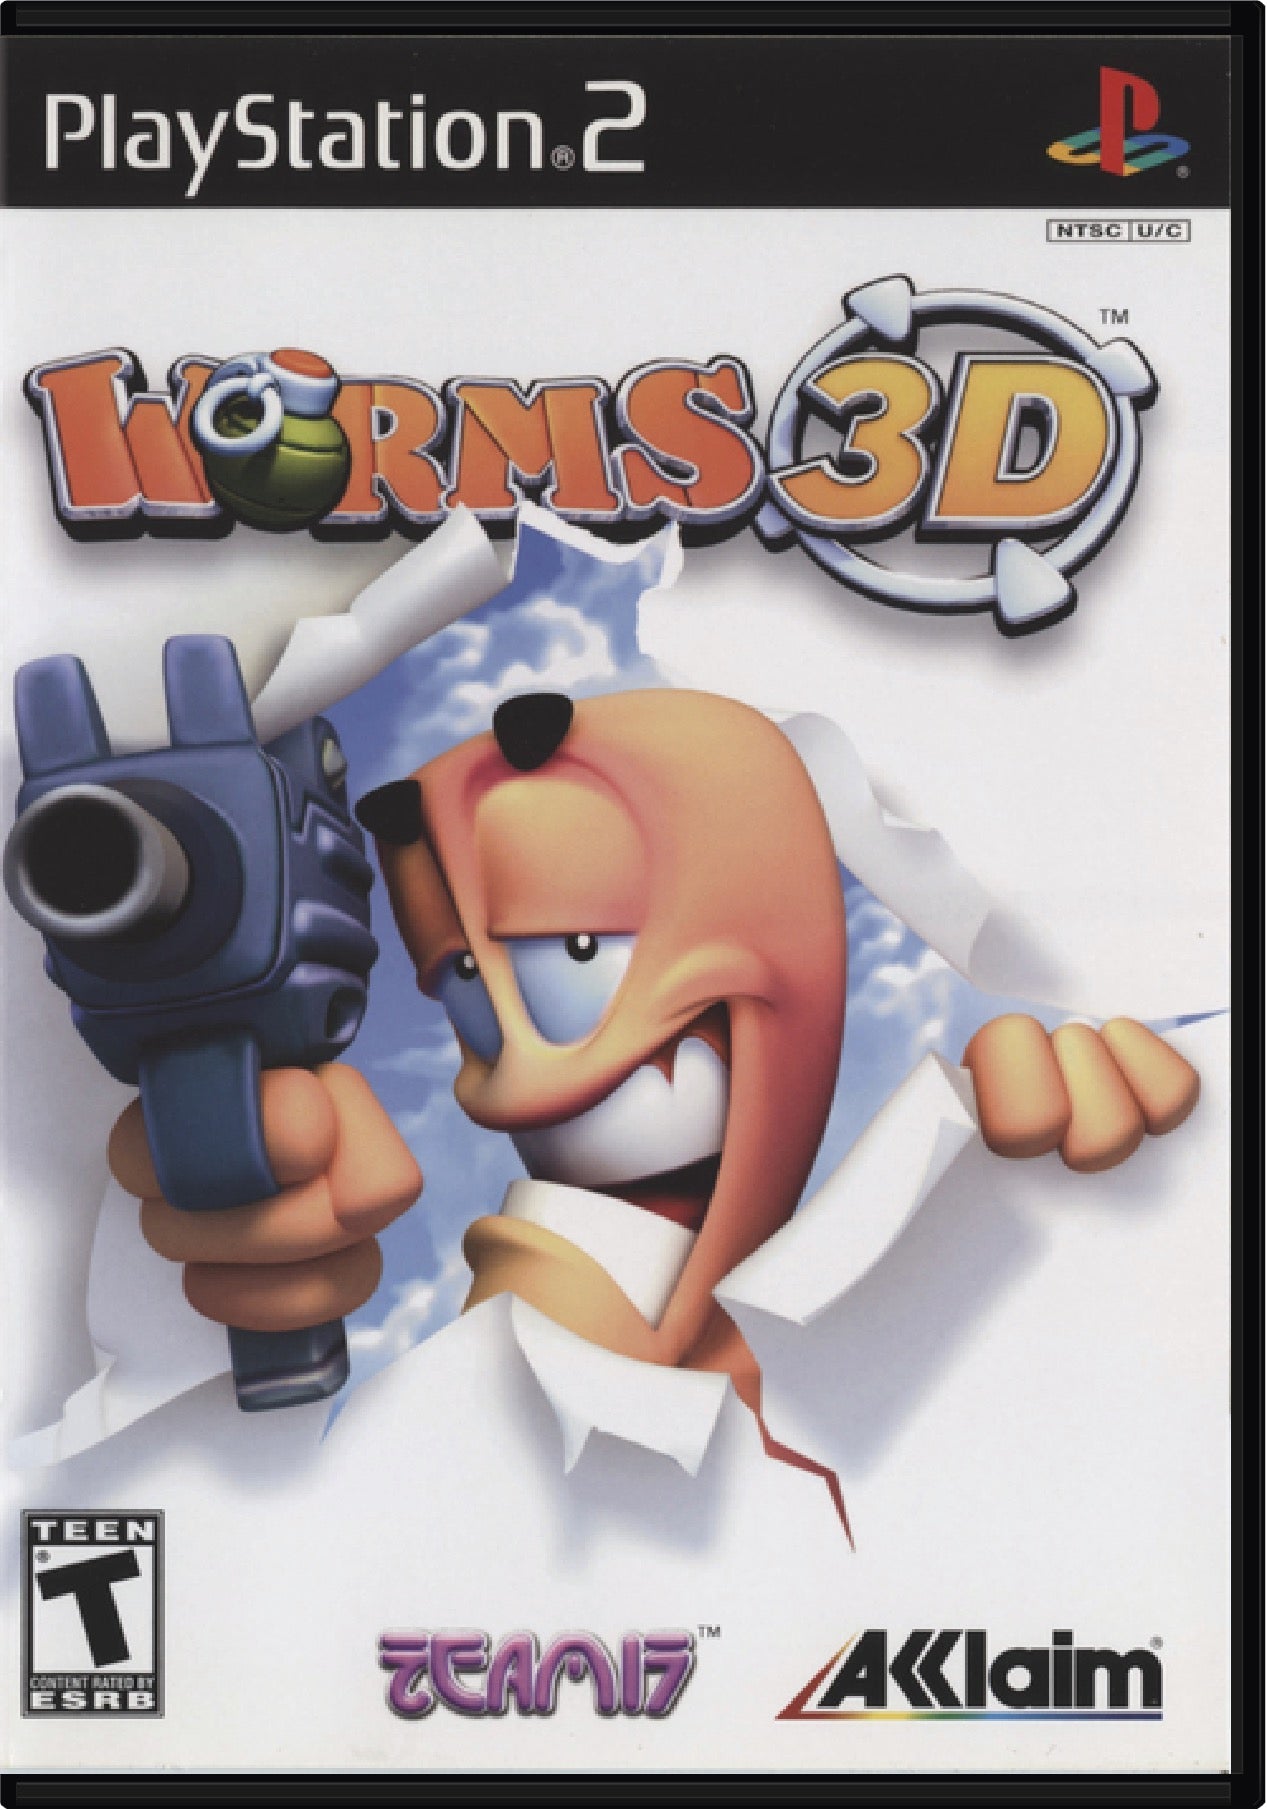 Worms 3D Cover Art and Product Photo